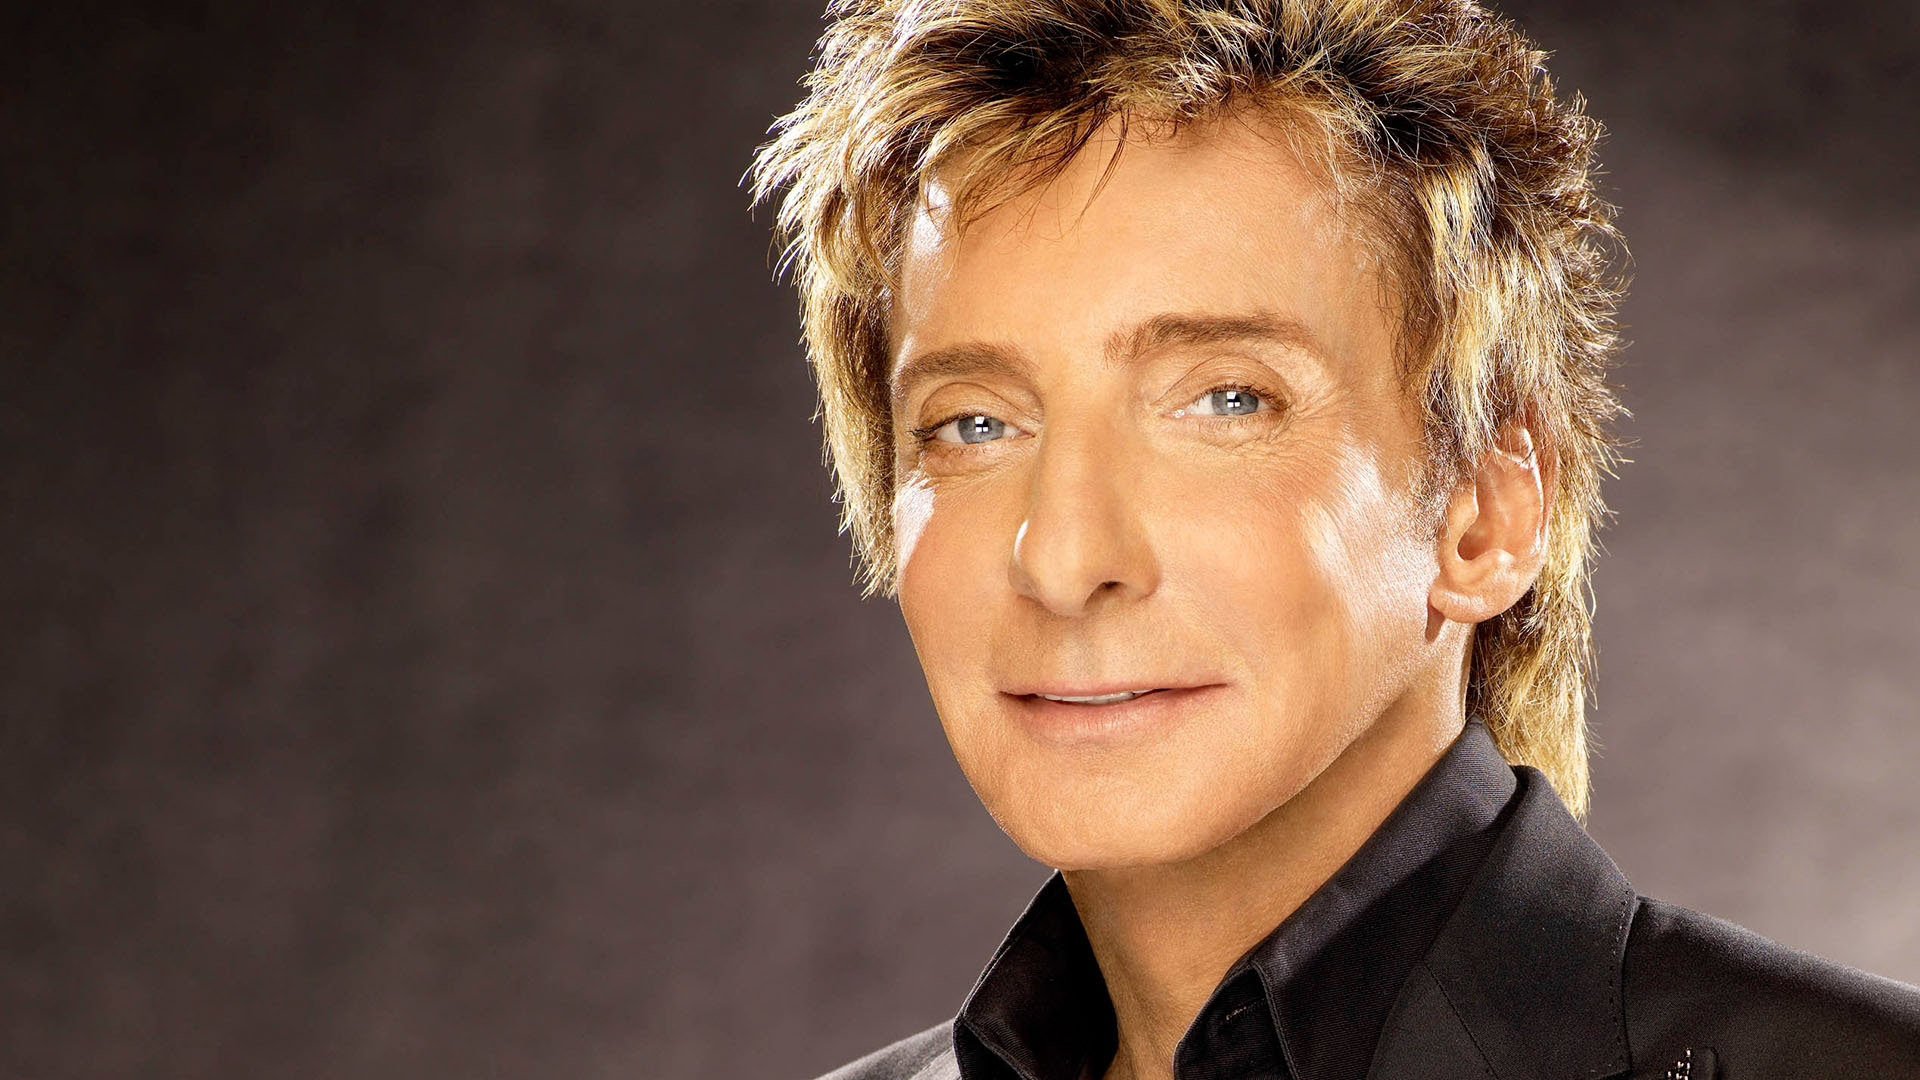 Barry Manilow #5